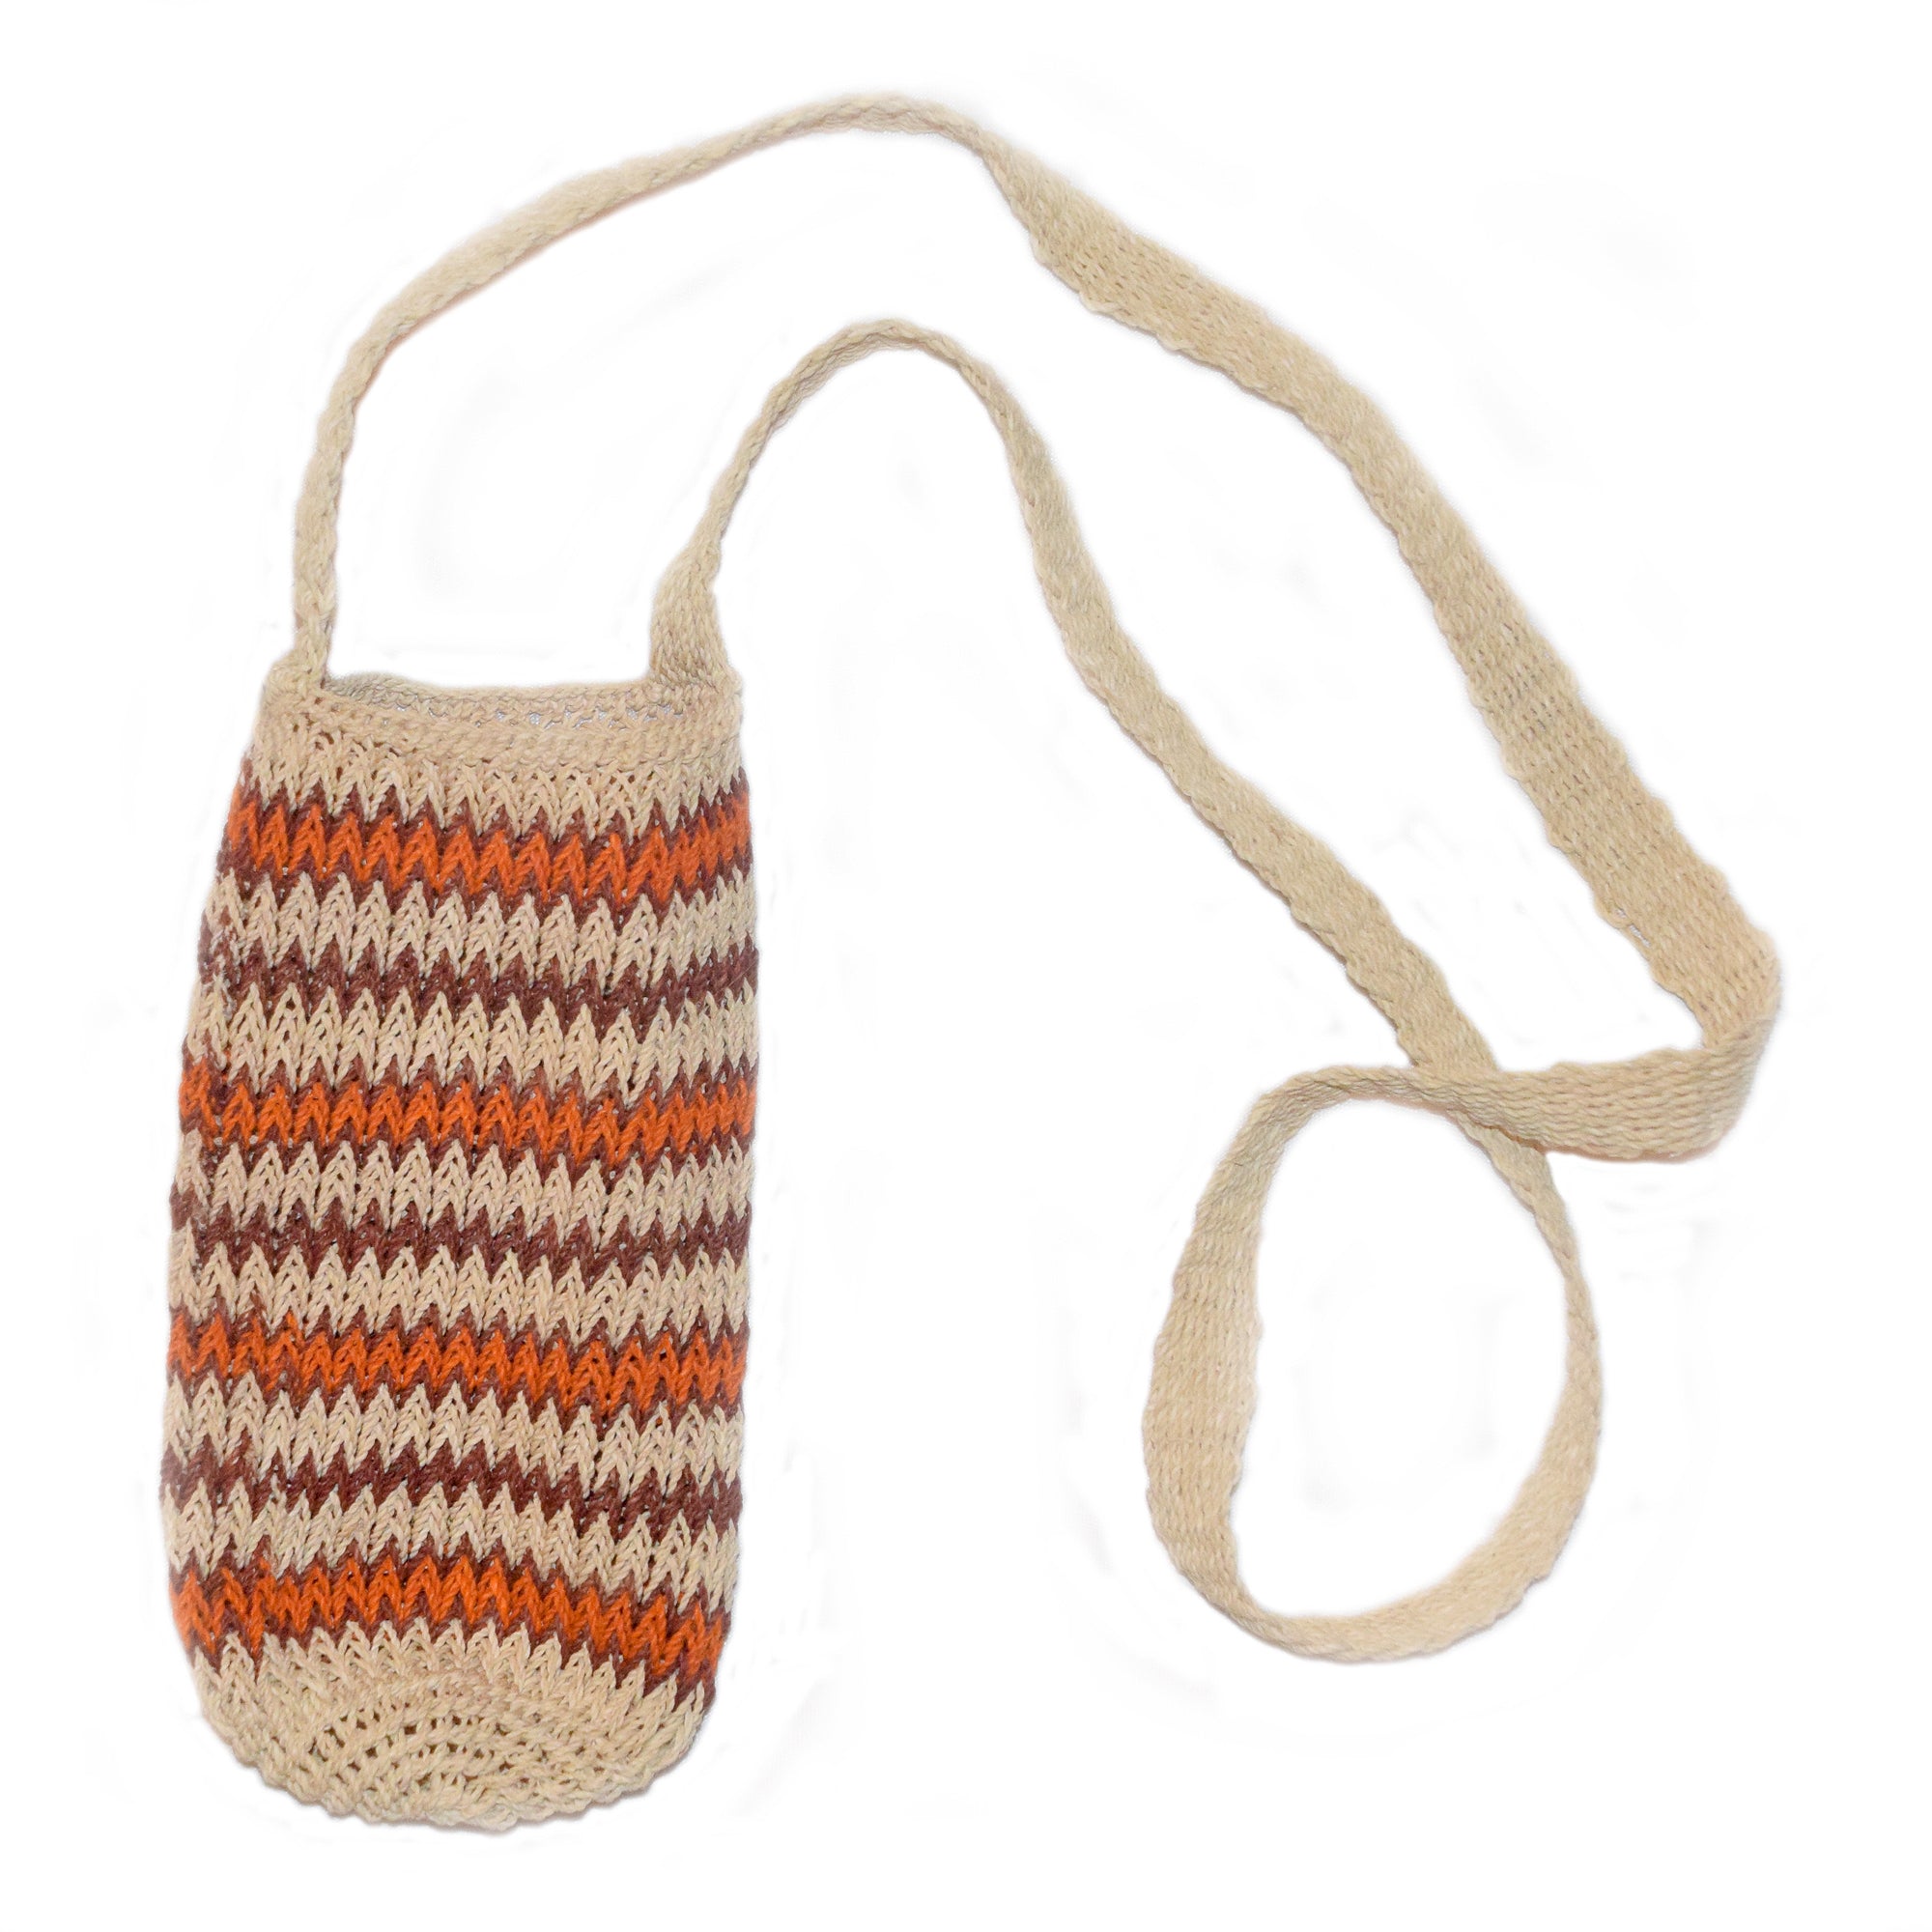 Fair-Trade Bottle Carrier/Wine Tote with maroon and orange zig-zag bands (WCQ151)